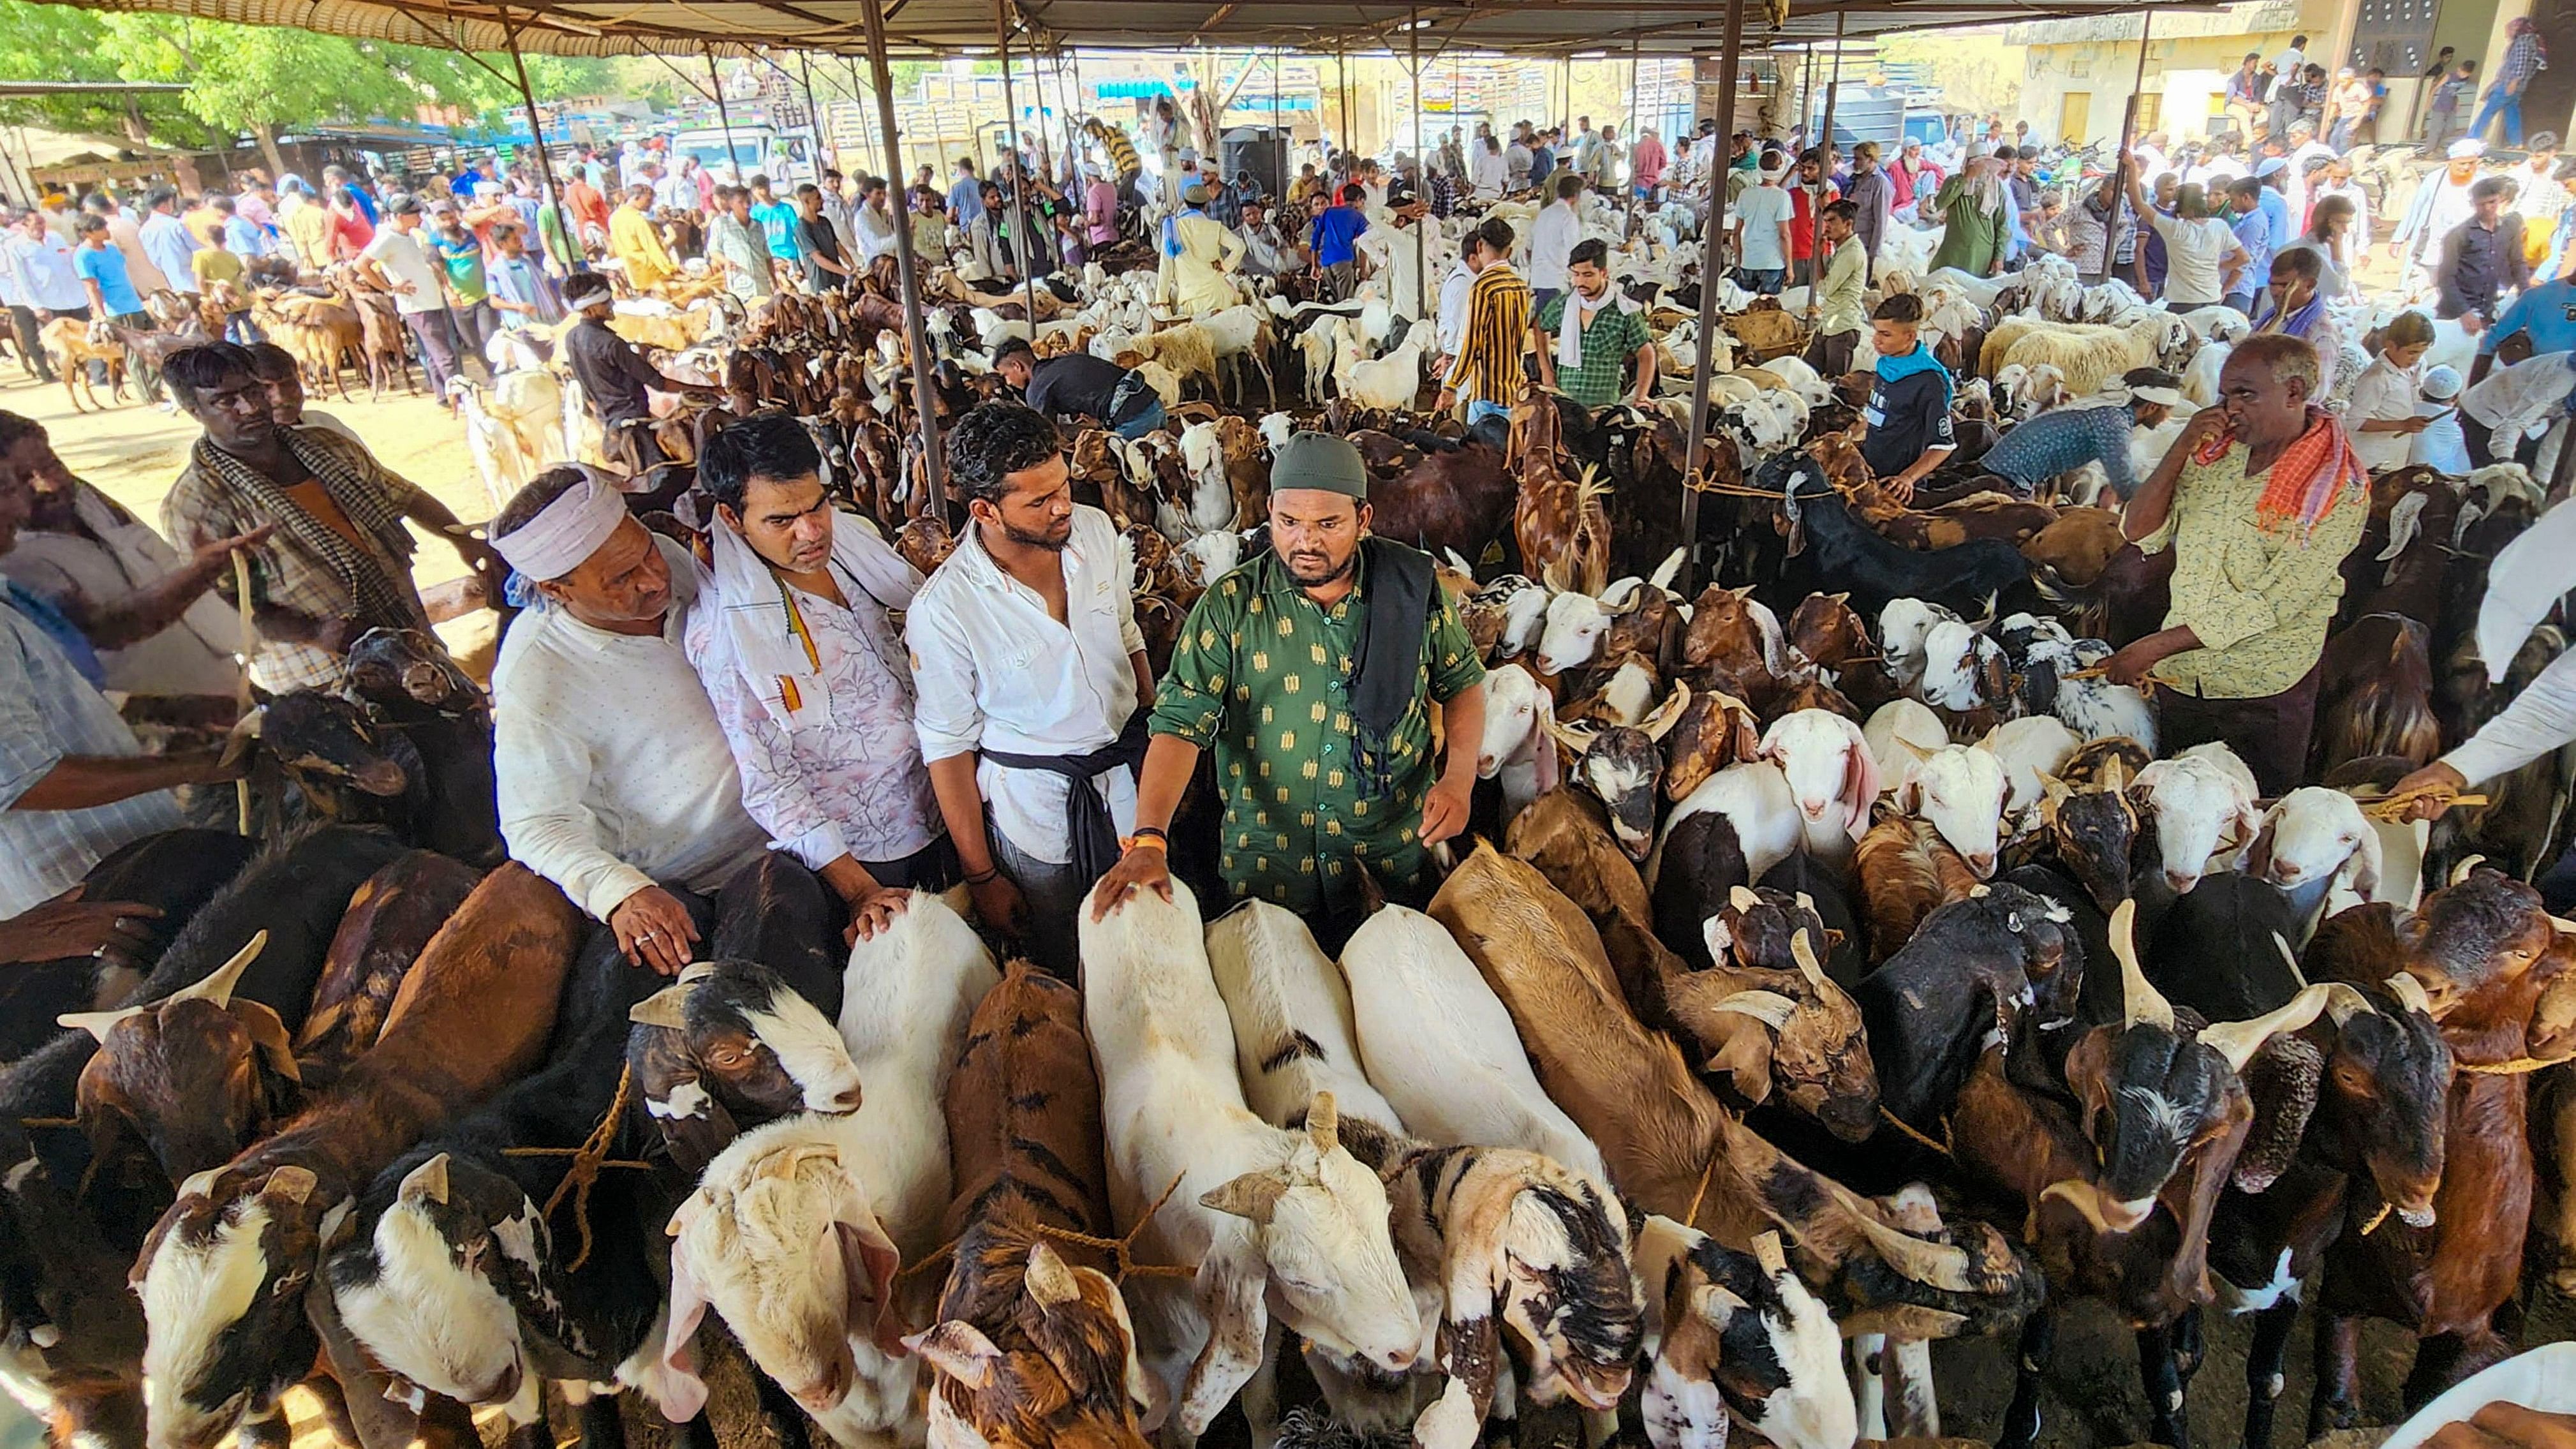 <div class="paragraphs"><p>Goats being sold ahead of Eid al-Adha (Bakra Eid), at a livestock market.</p></div>